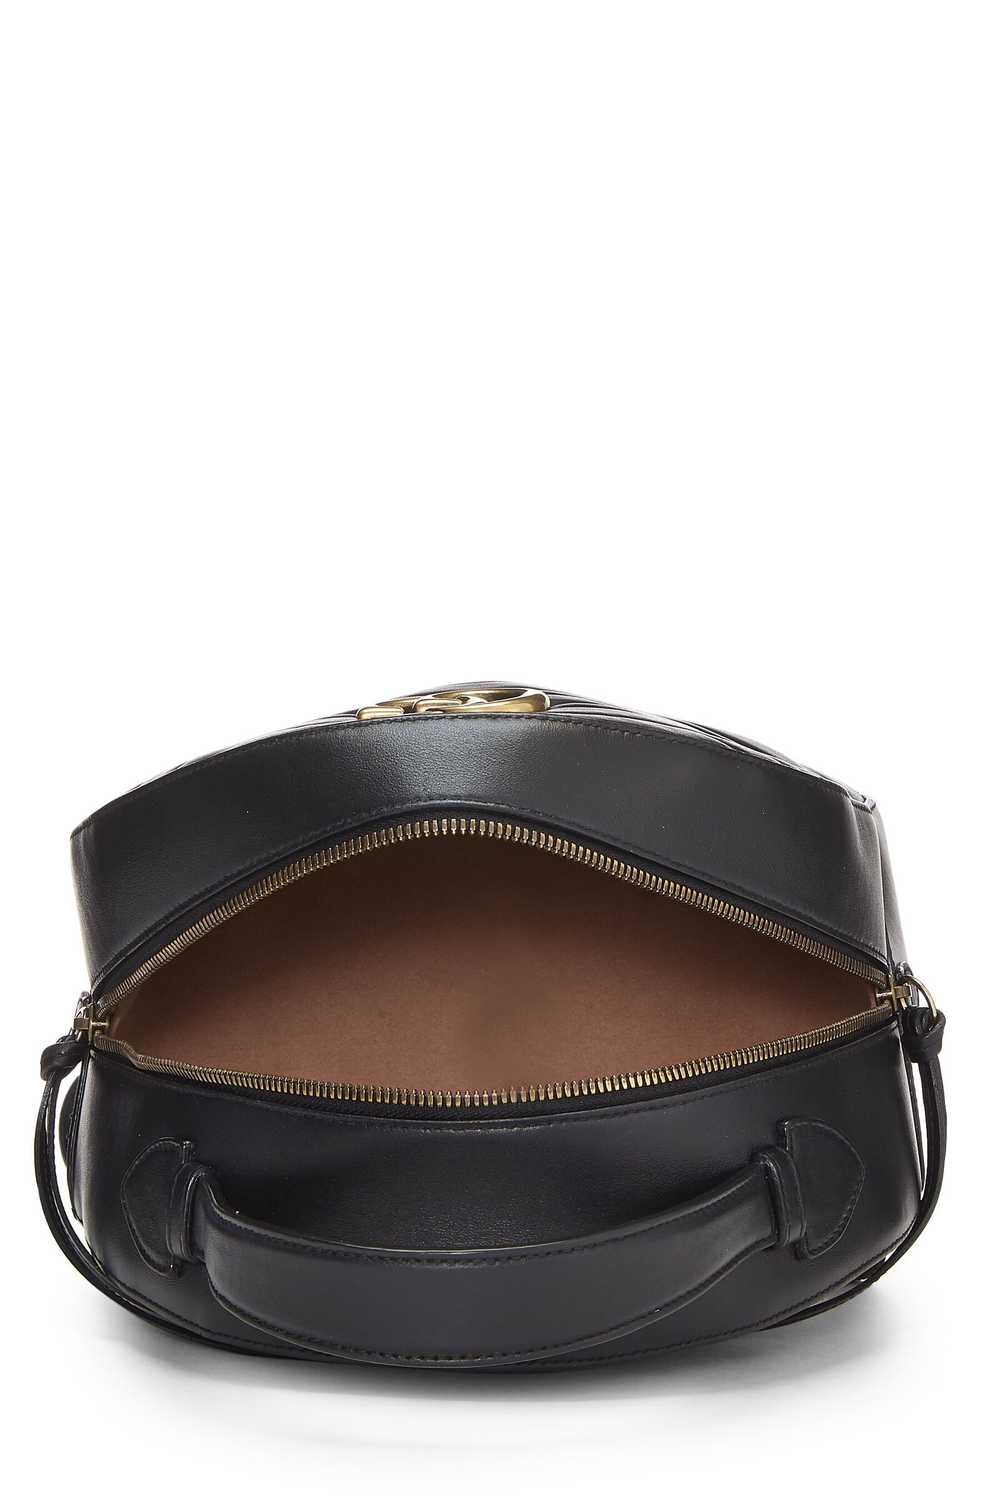 Black Leather Marmont Backpack - image 7